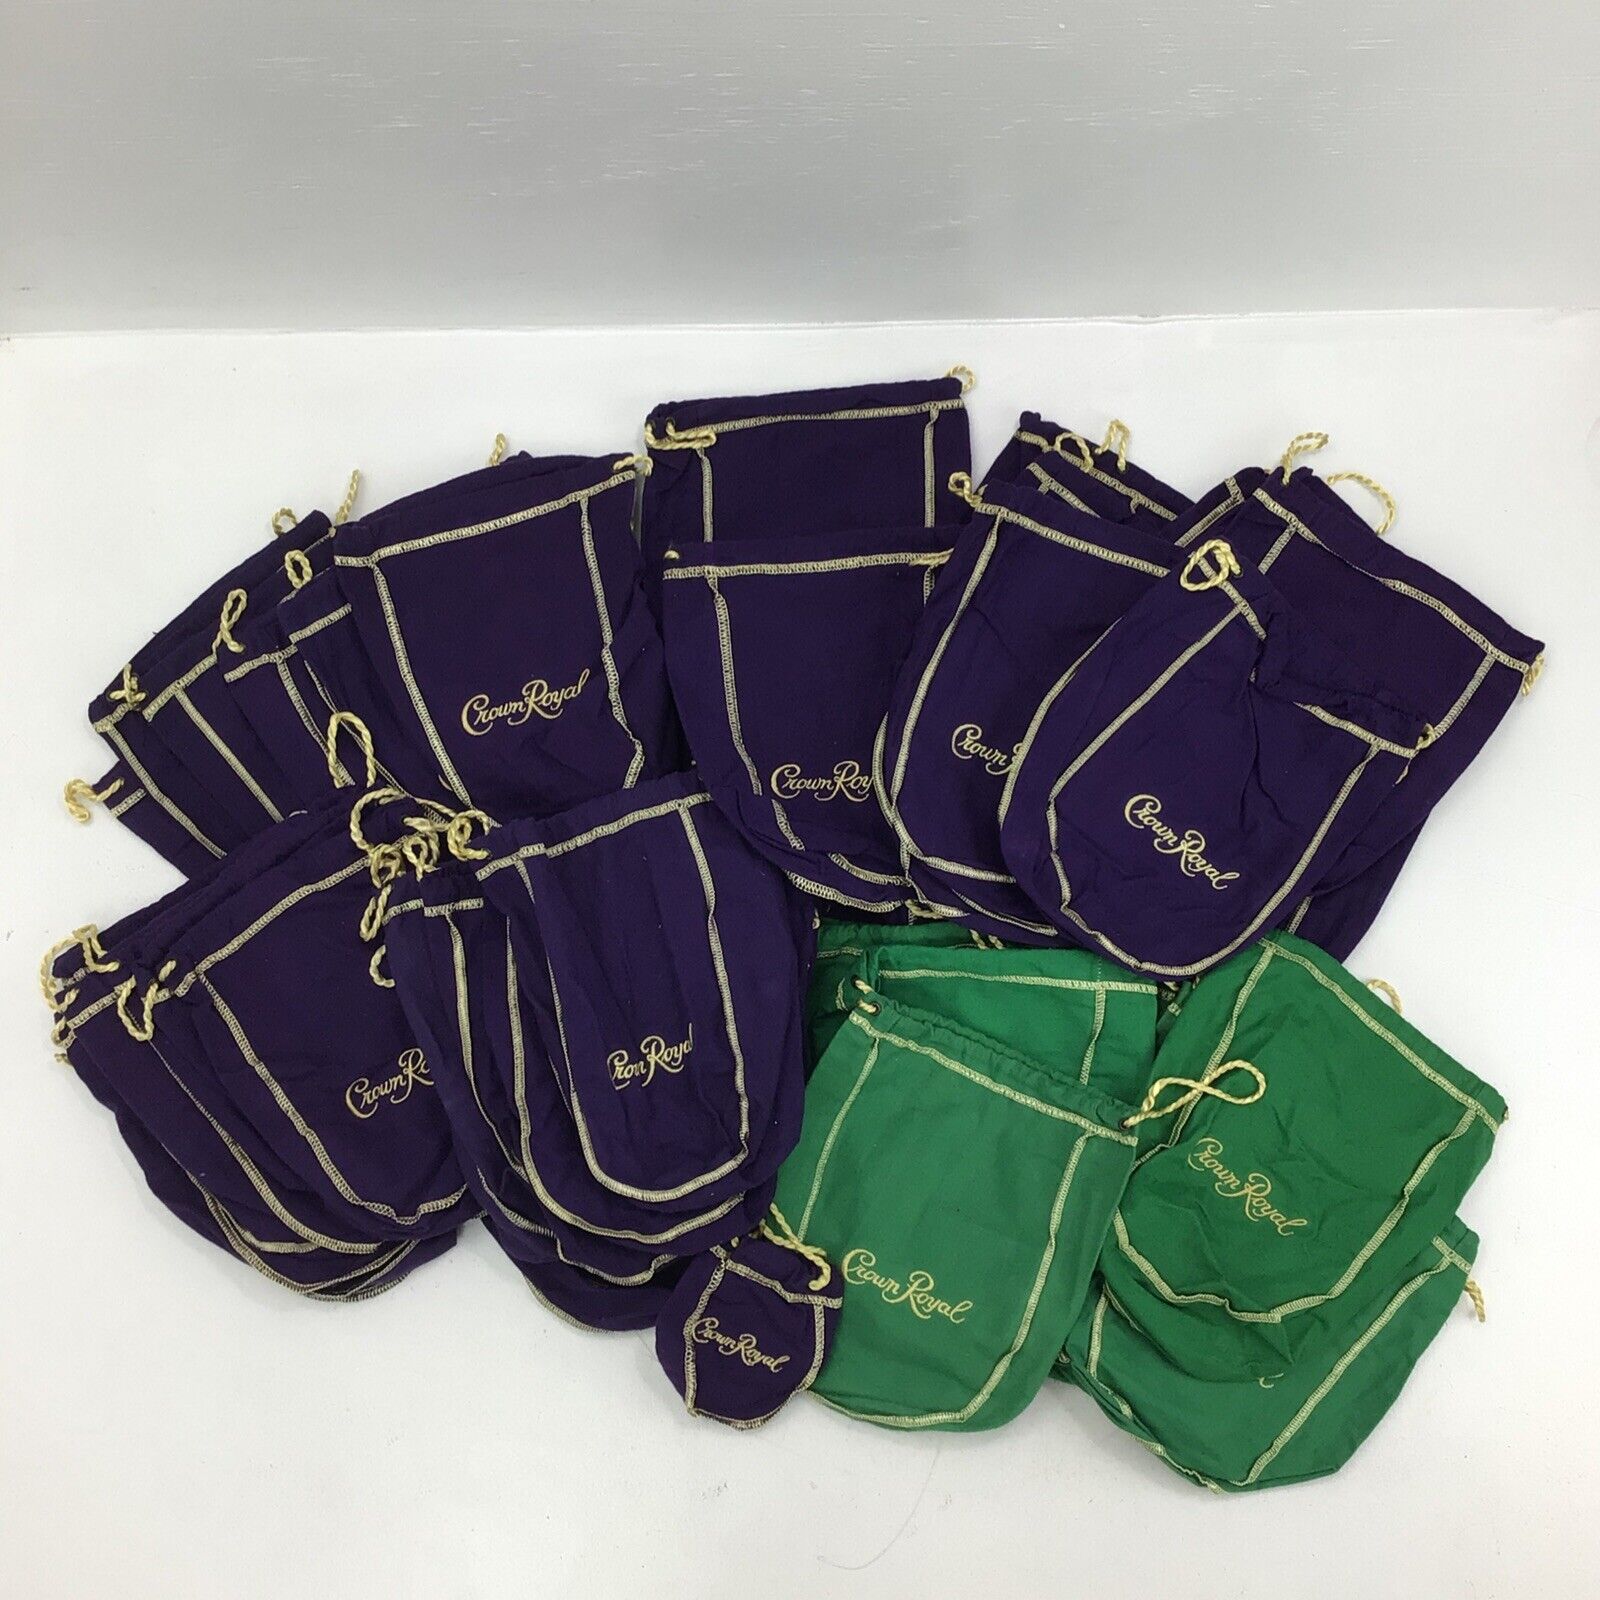 Lot of 52 Various Size Purple & Green Crown Royal Bags